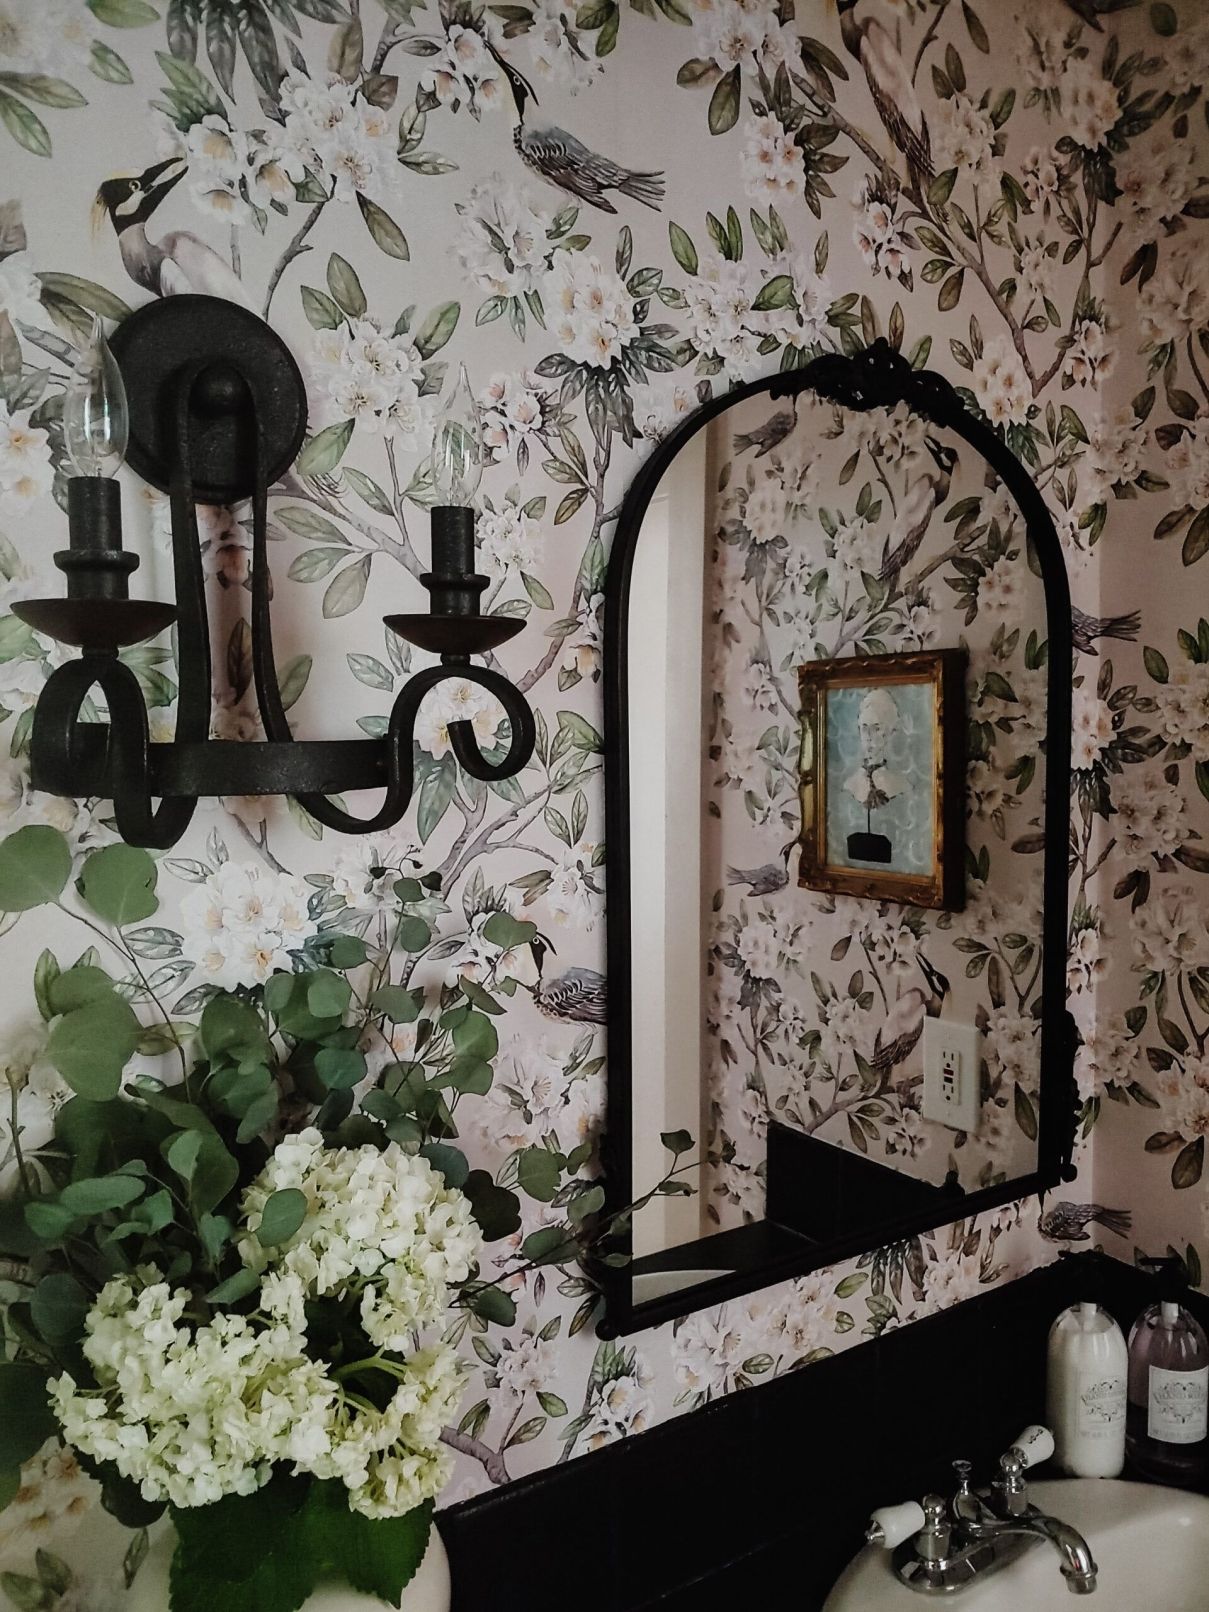 Victoria wallpaper Up Close With Black Mirror and Wall Sconce • Bathroom Wallpaper • G. Lucy Wilkening